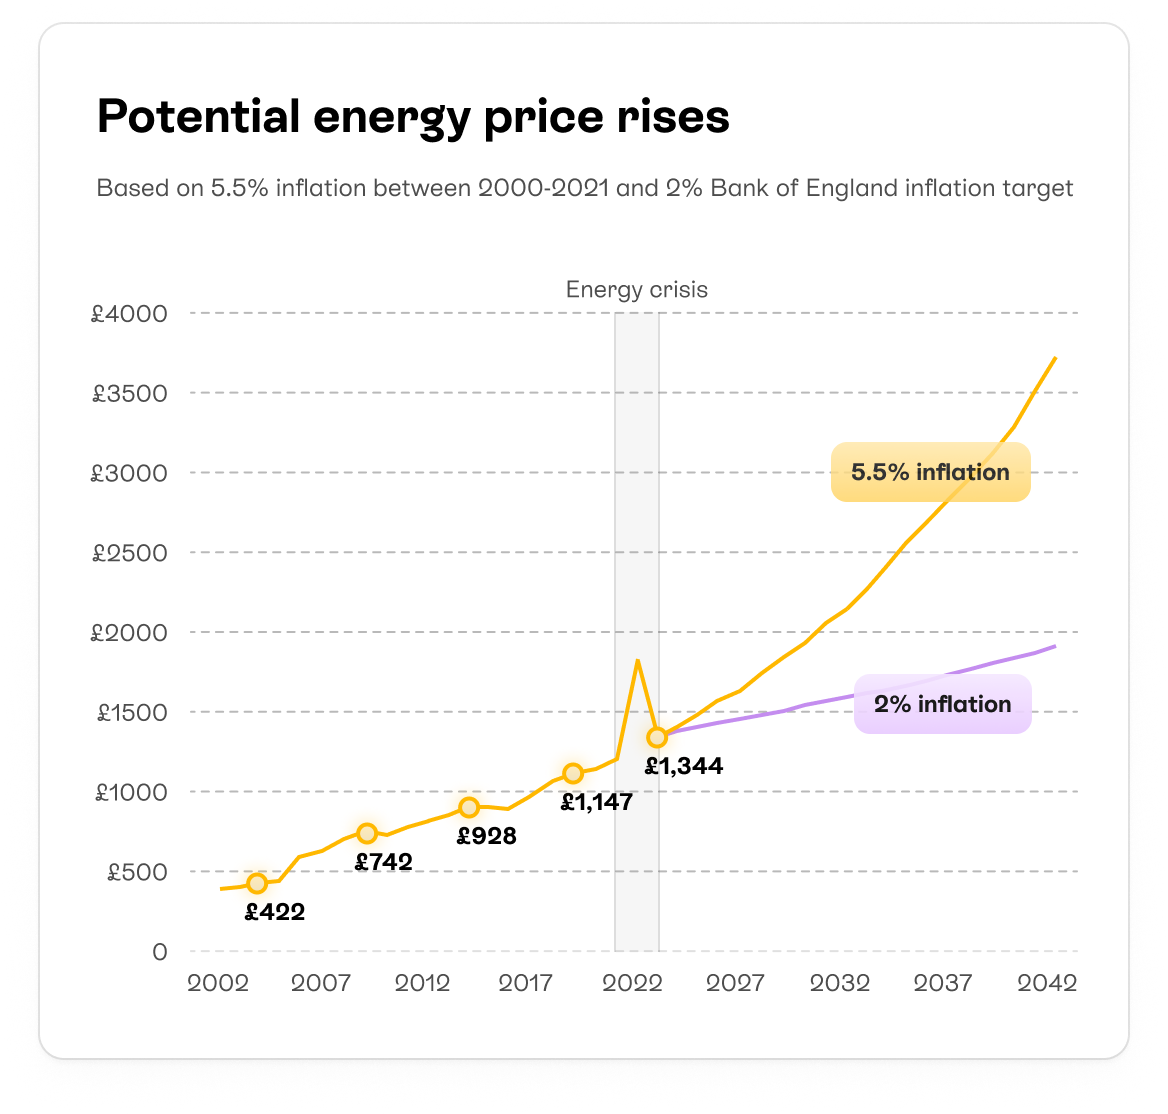 Potential energy price rises graph